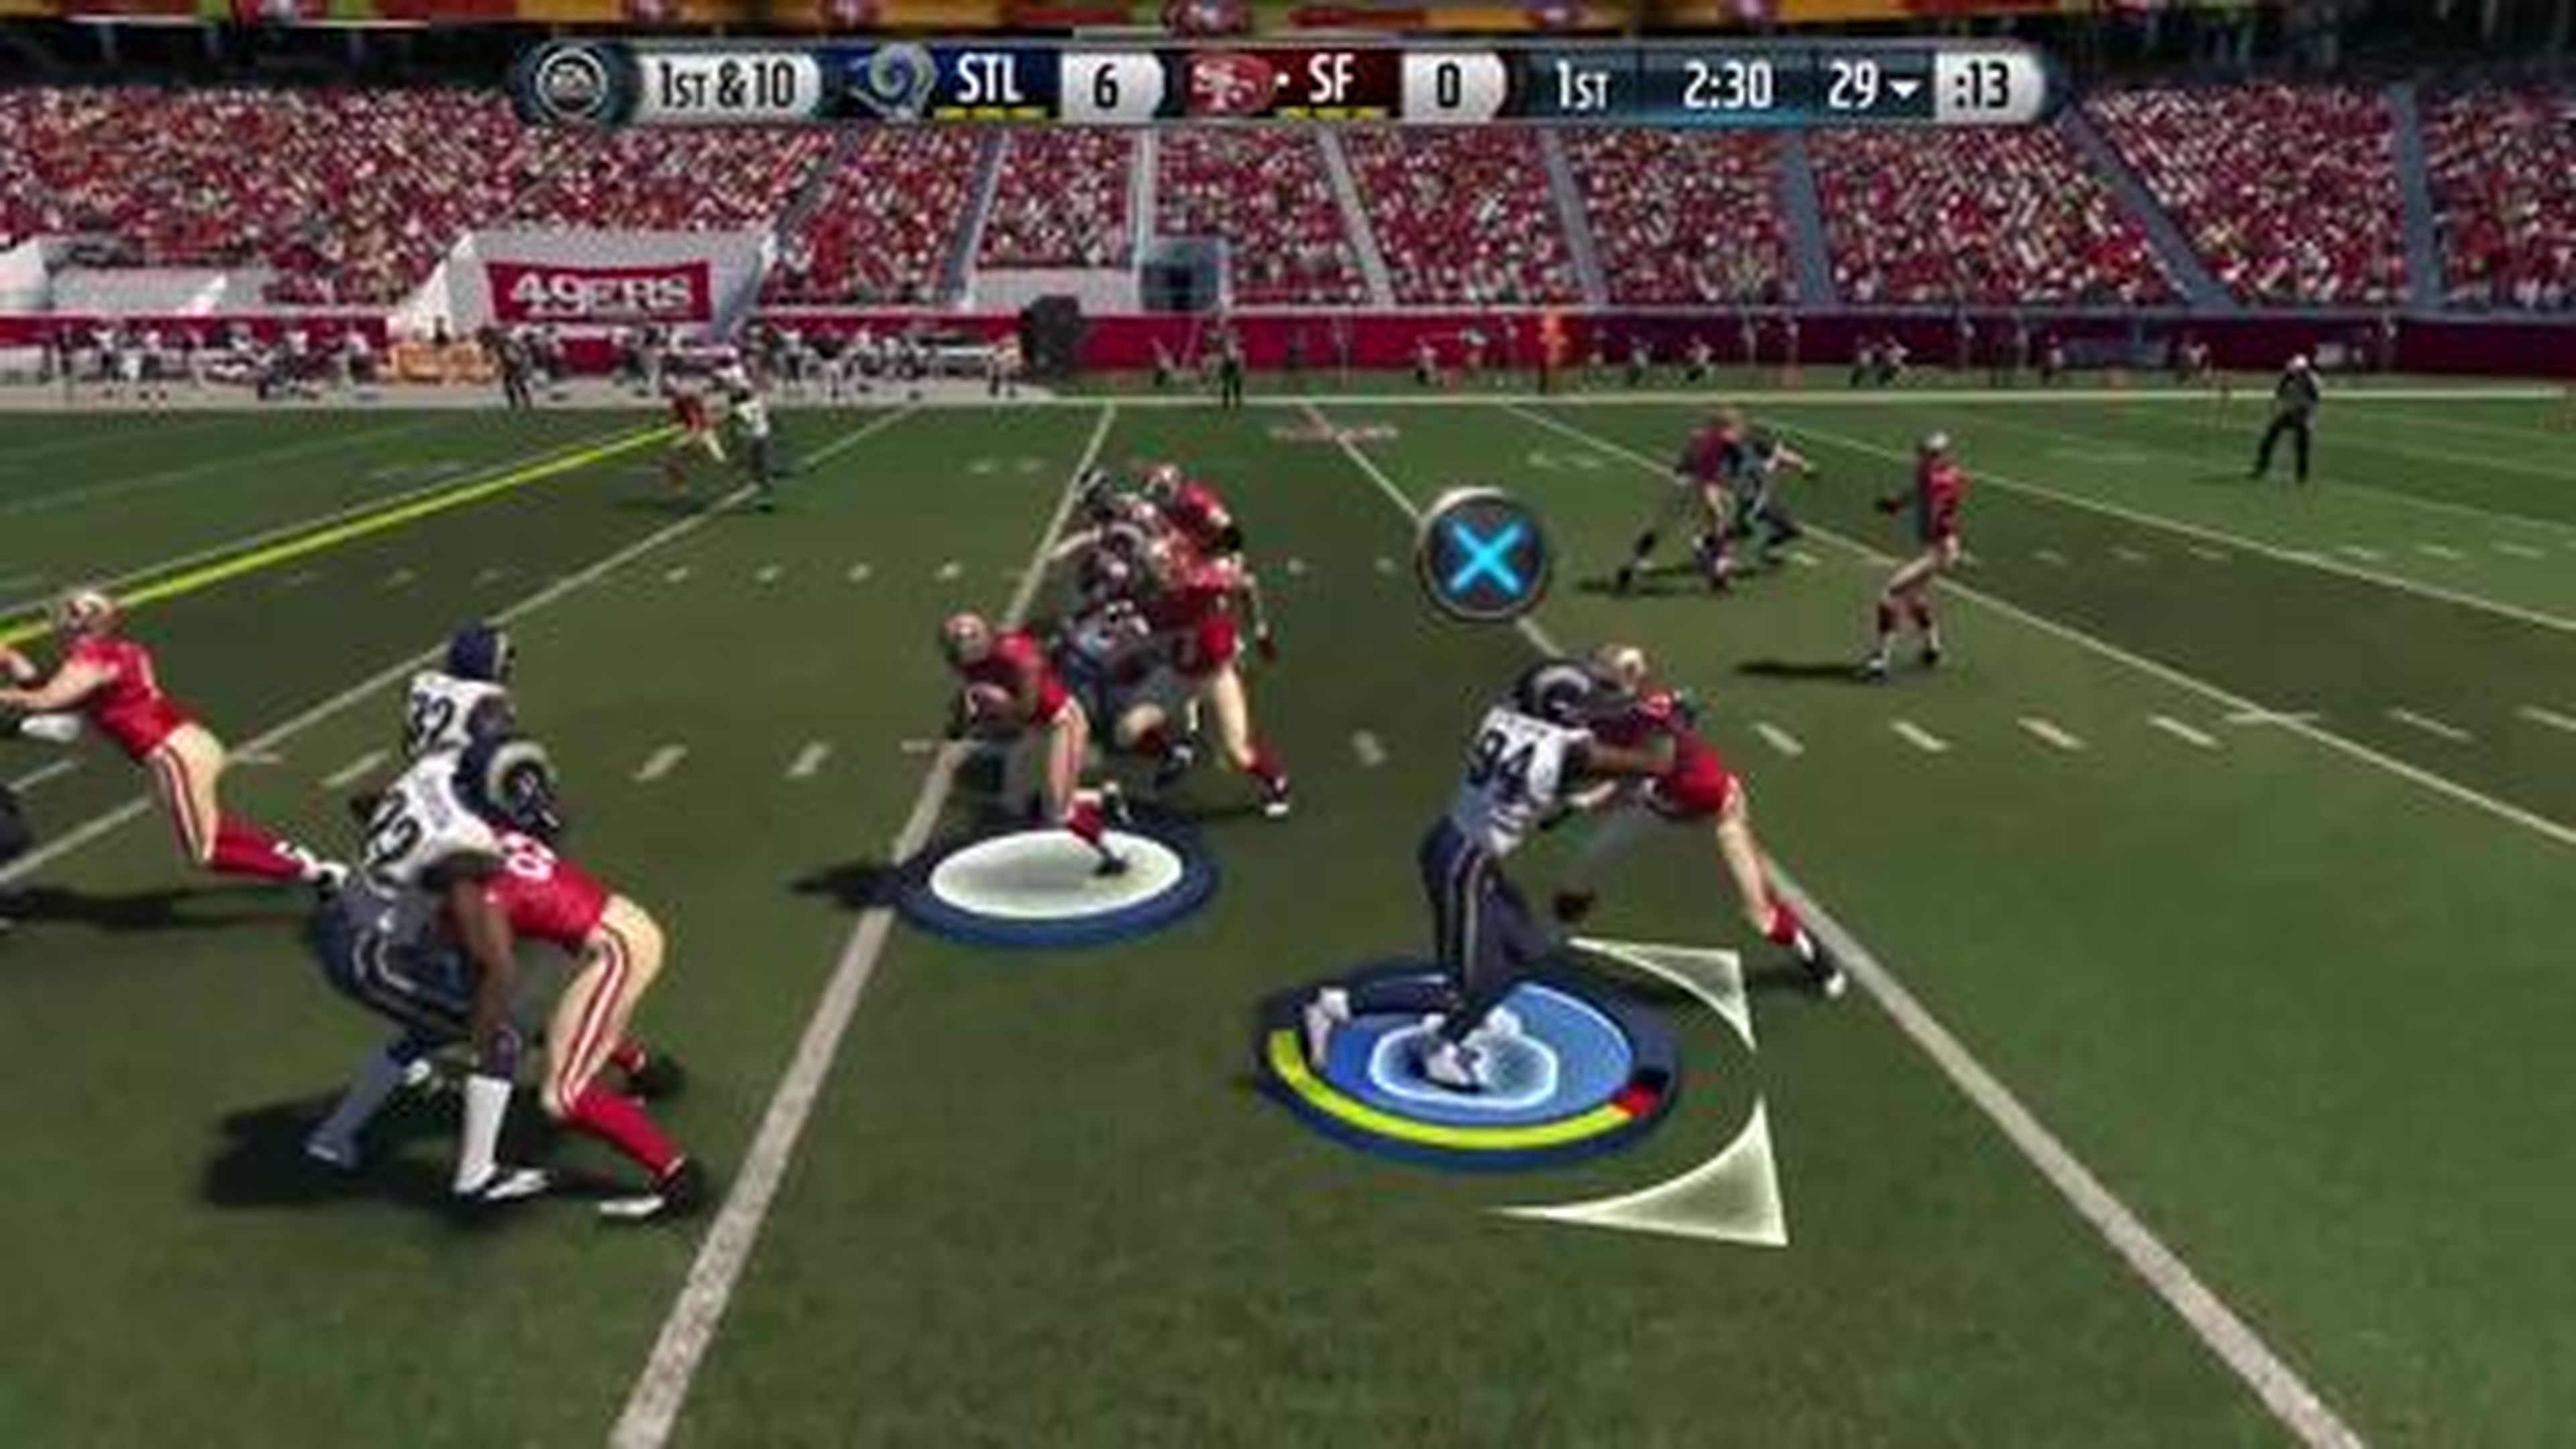 Madden 15 Gameplay Features - War in the Trenches 2.0 - Official Trailer